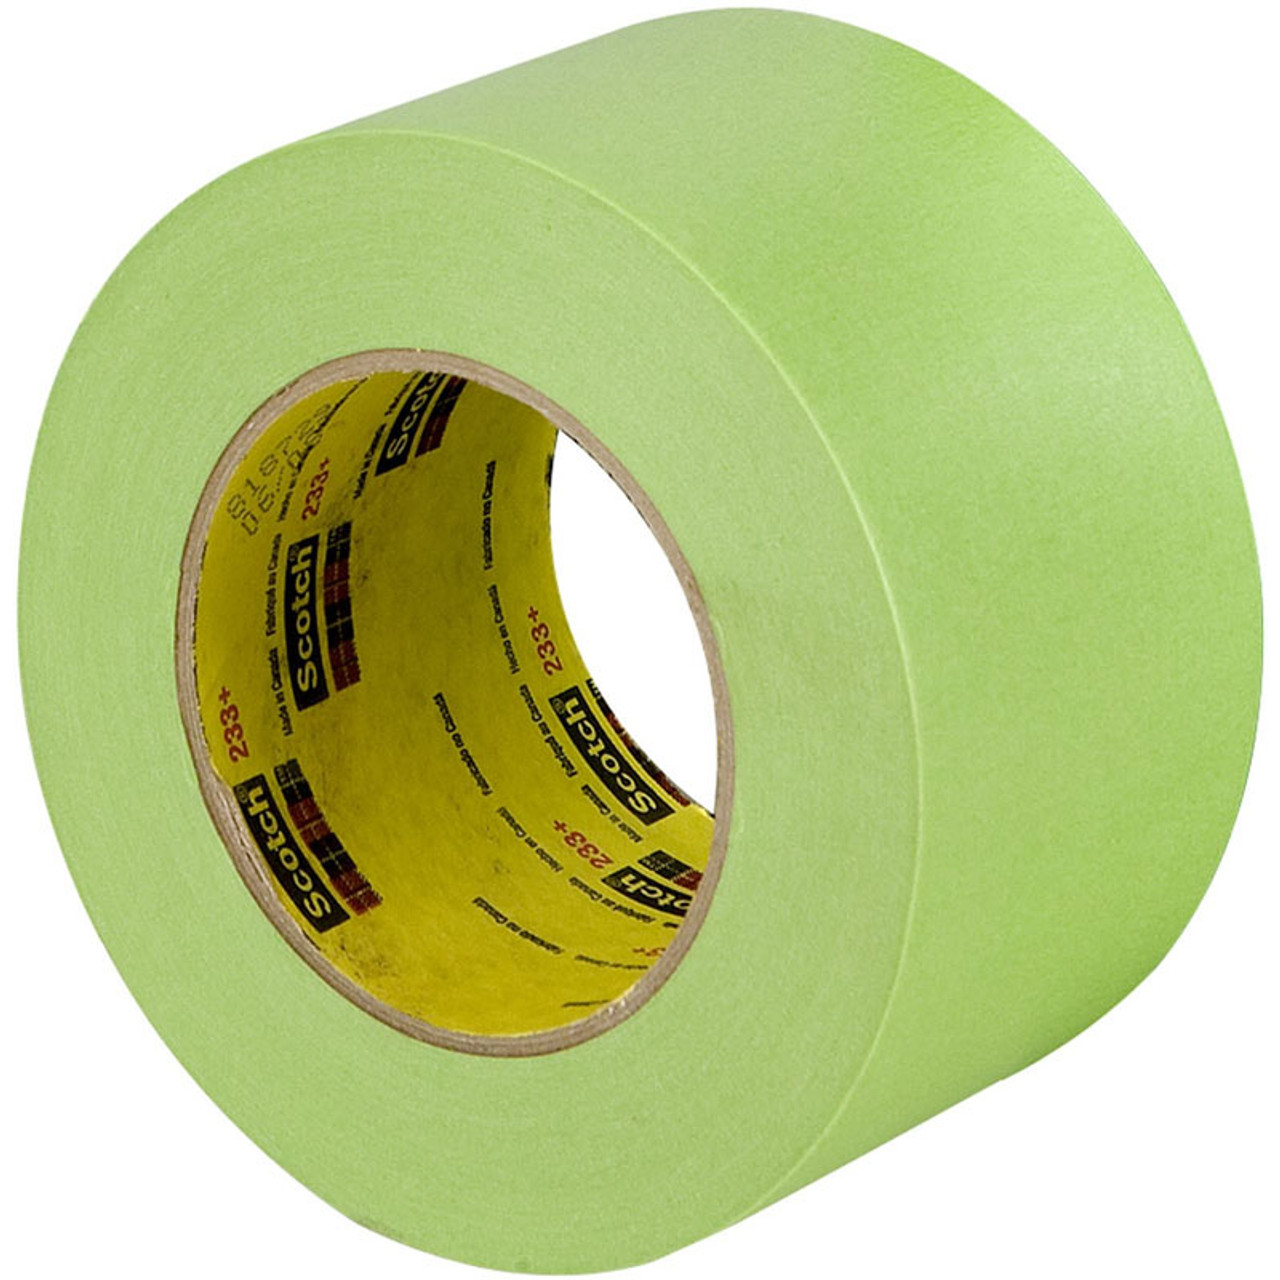 What's the Difference between Performance Masking Tape Colors